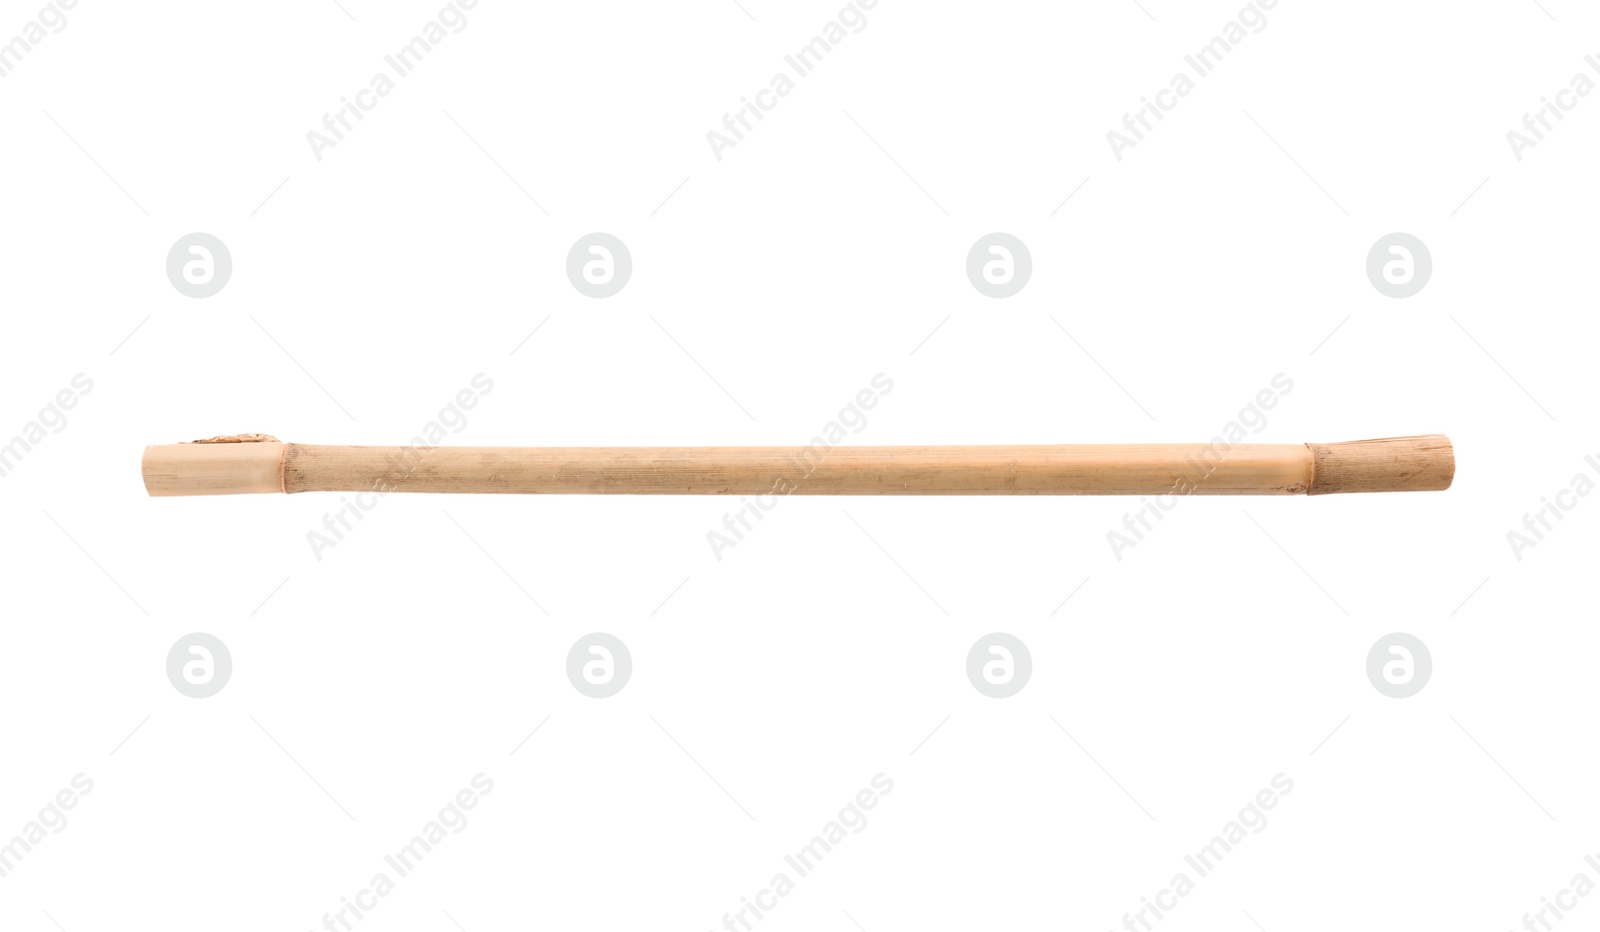 Photo of Dry bamboo stick on white background